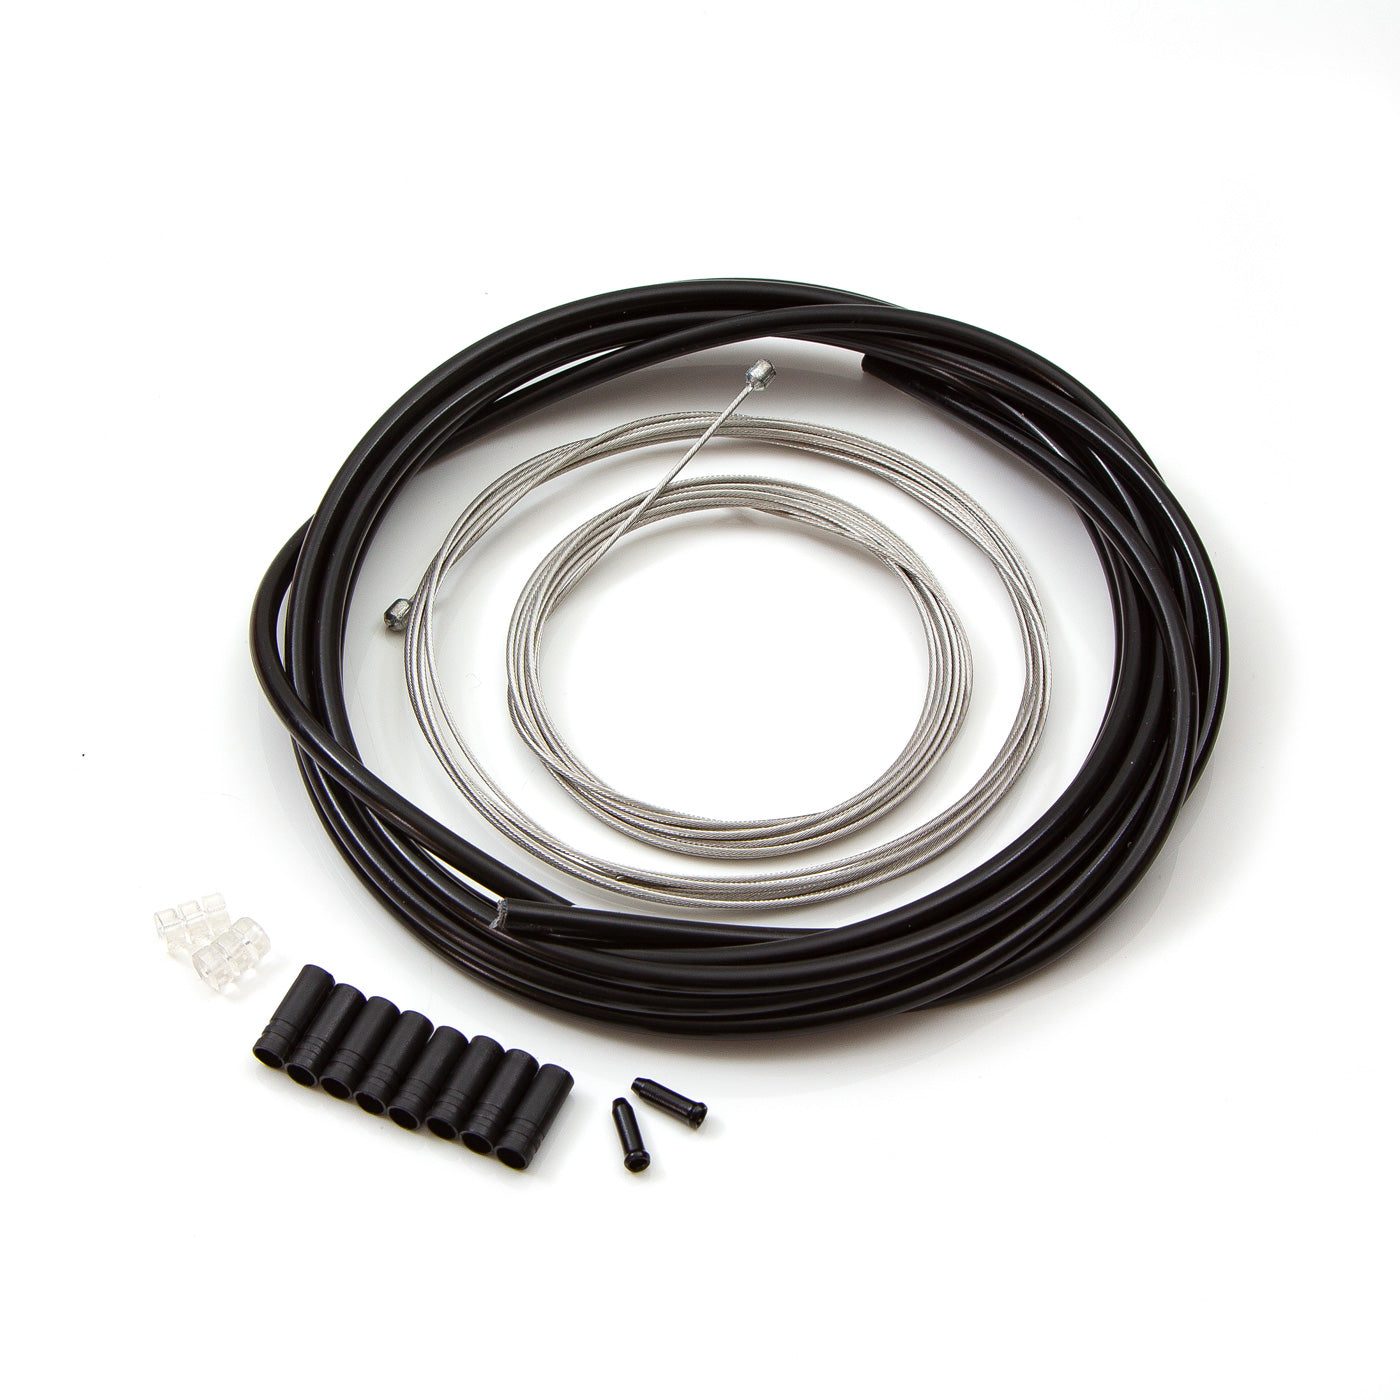 View Stainless Steel Universal Gear Cable Kit Black information